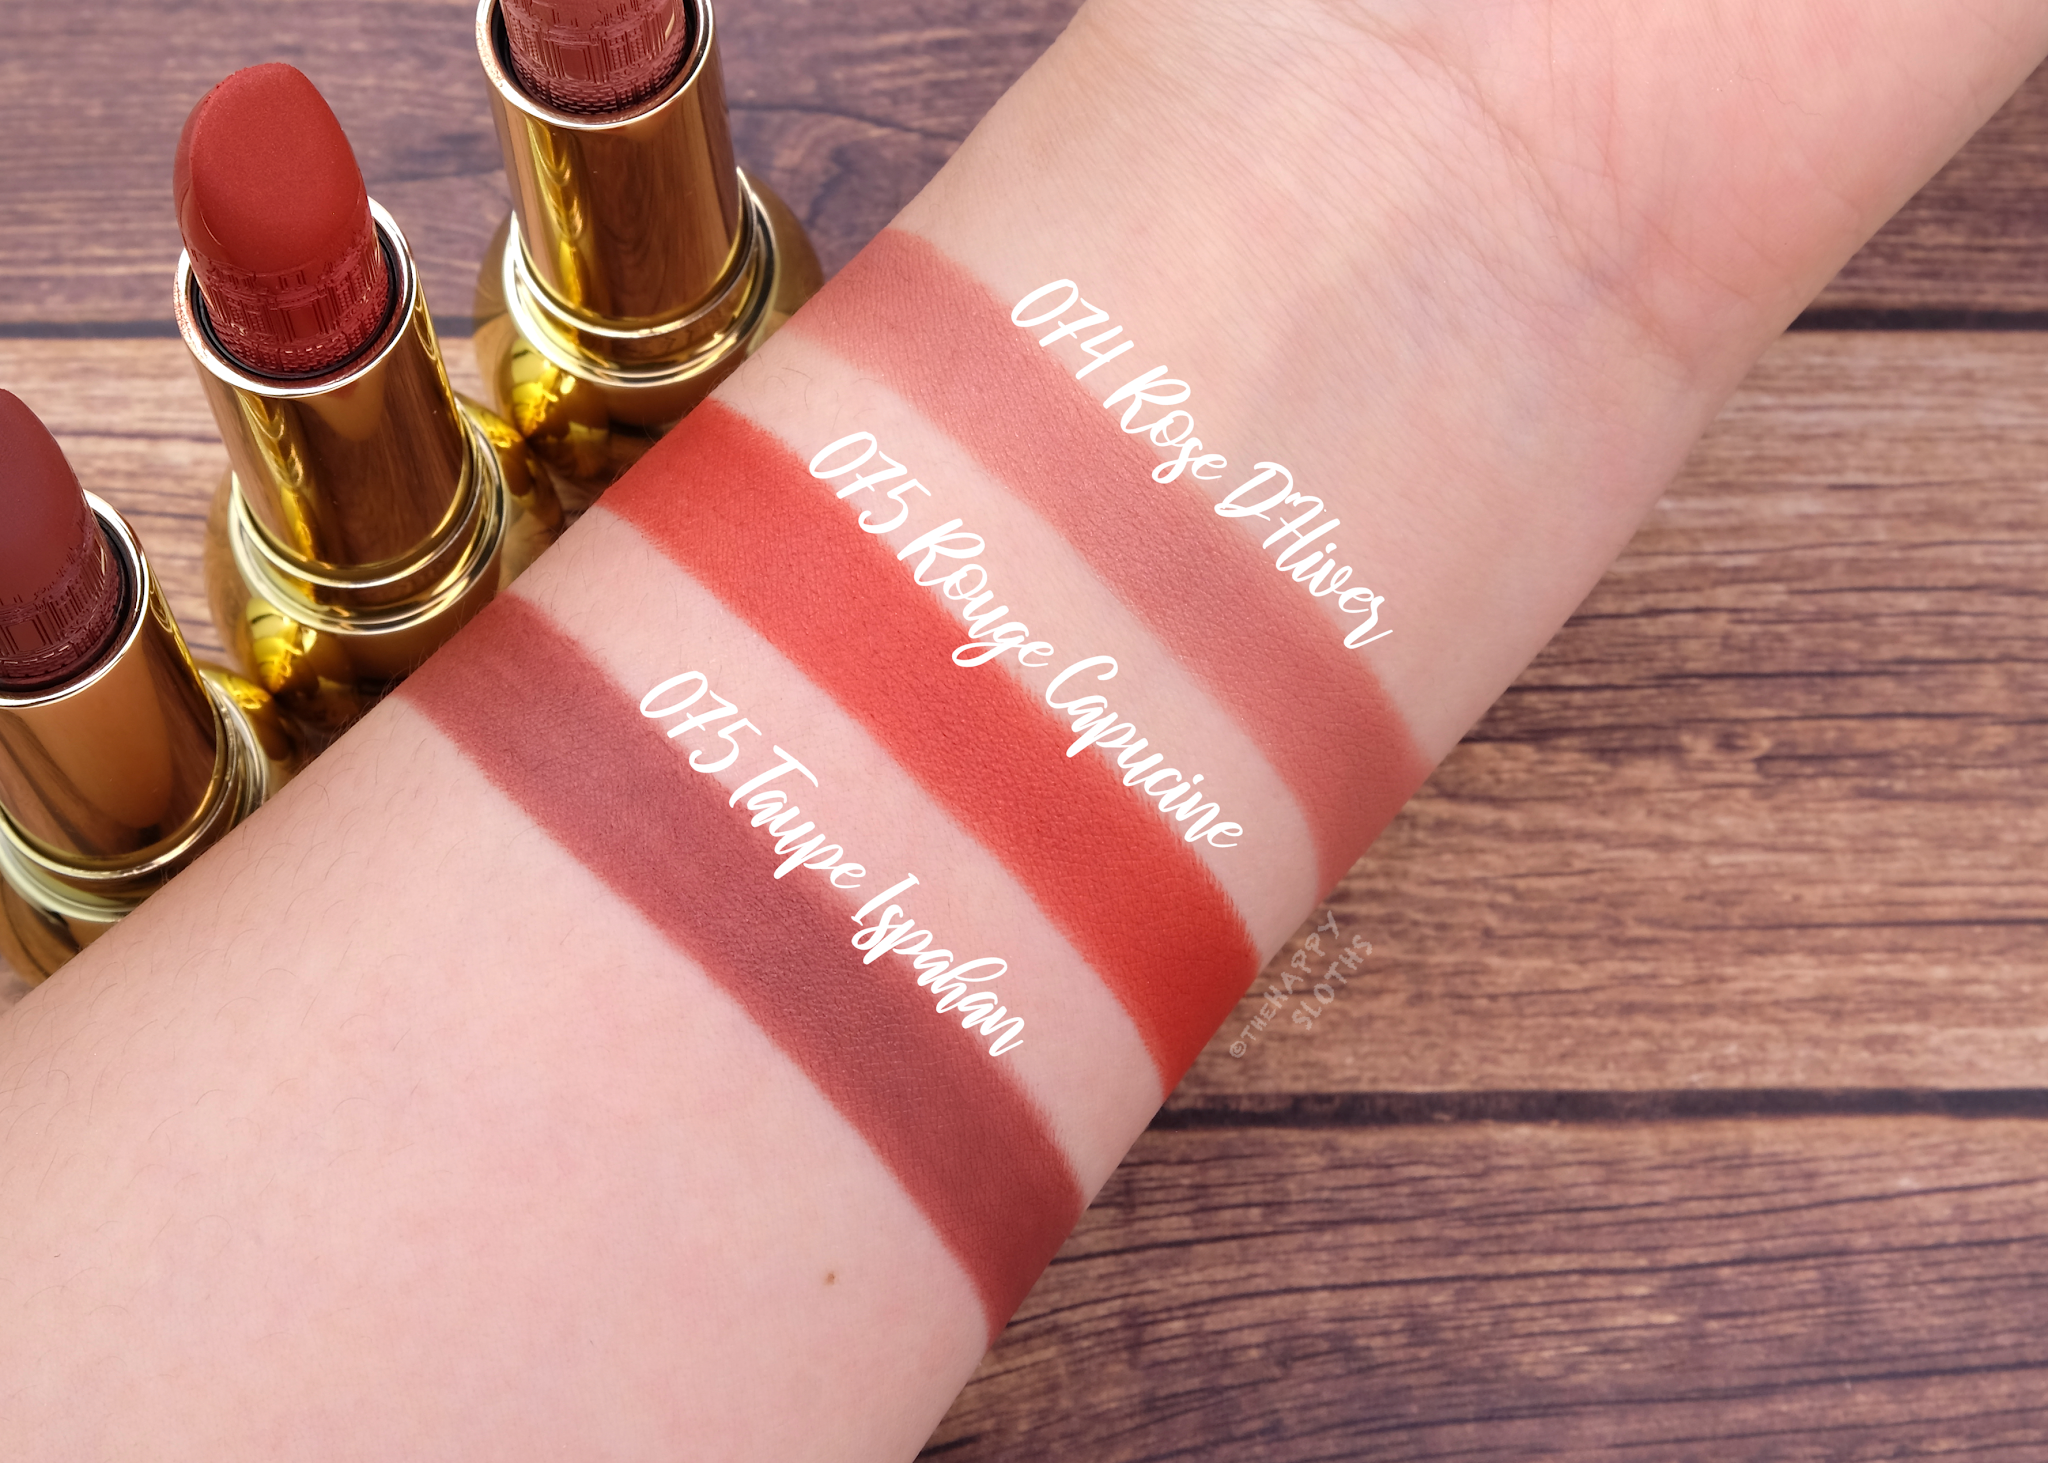 Dior | Holiday 2021 The Atelier of Dreams Rouge Diorific Lipstick: Review and Swatches